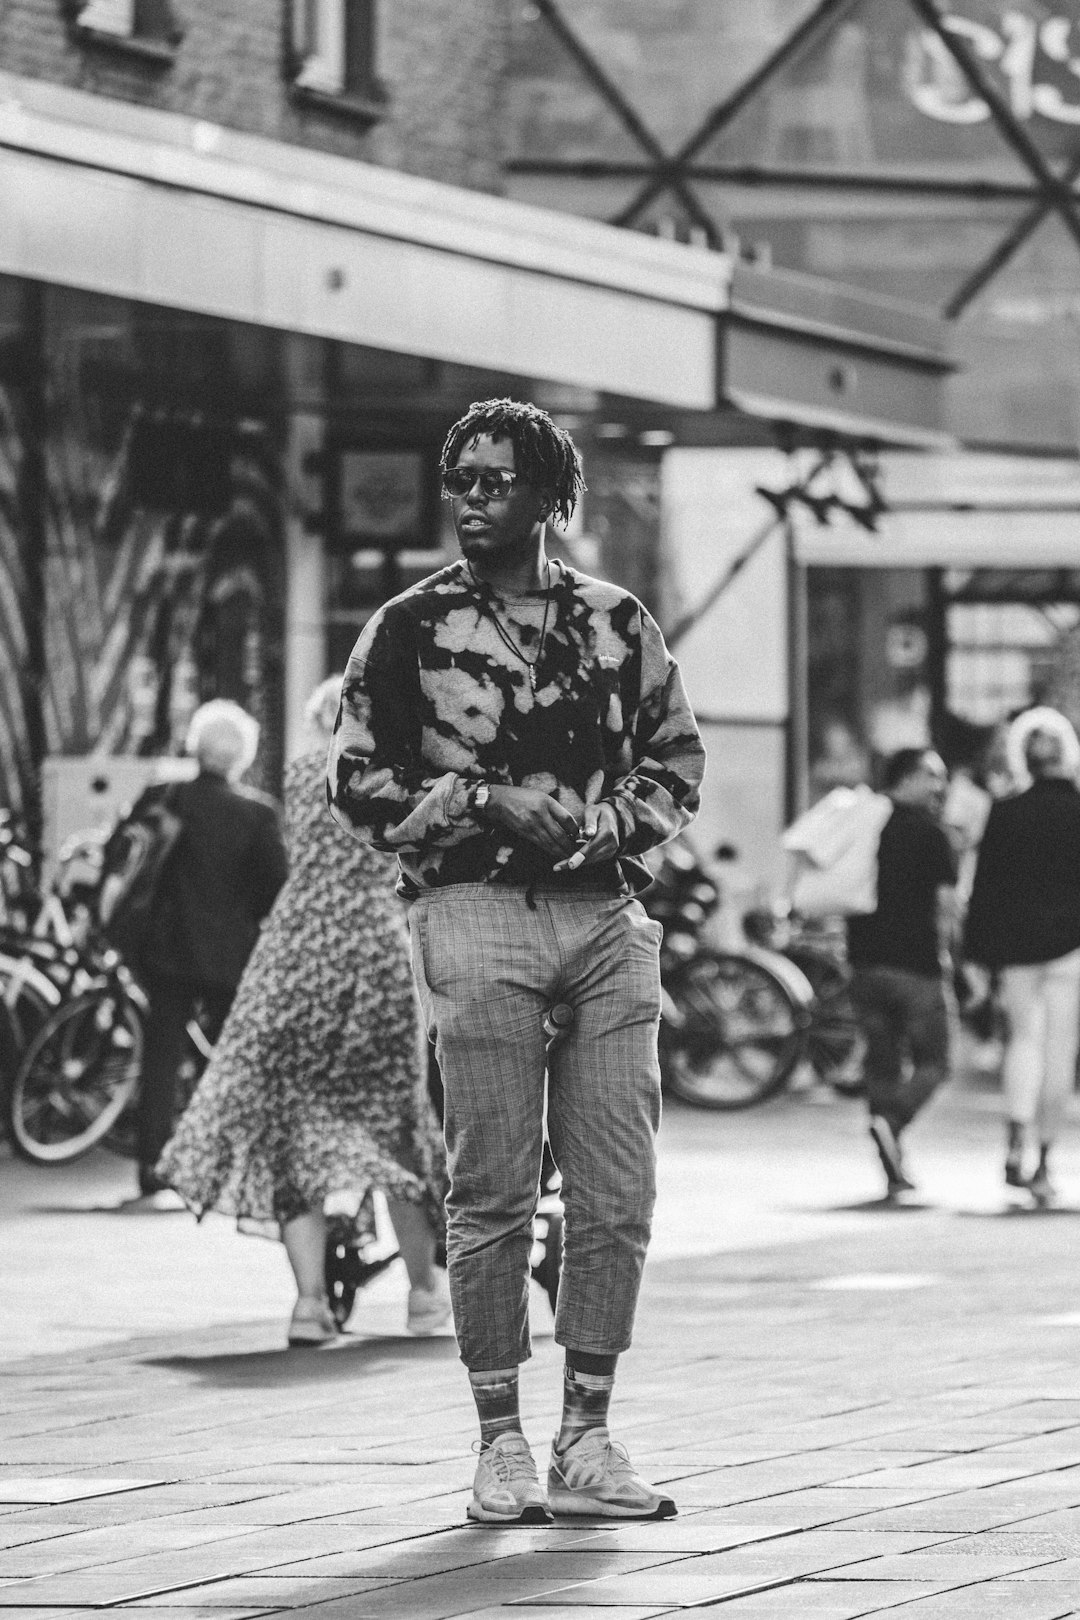 grayscale photo of woman in jacket and pants walking on street